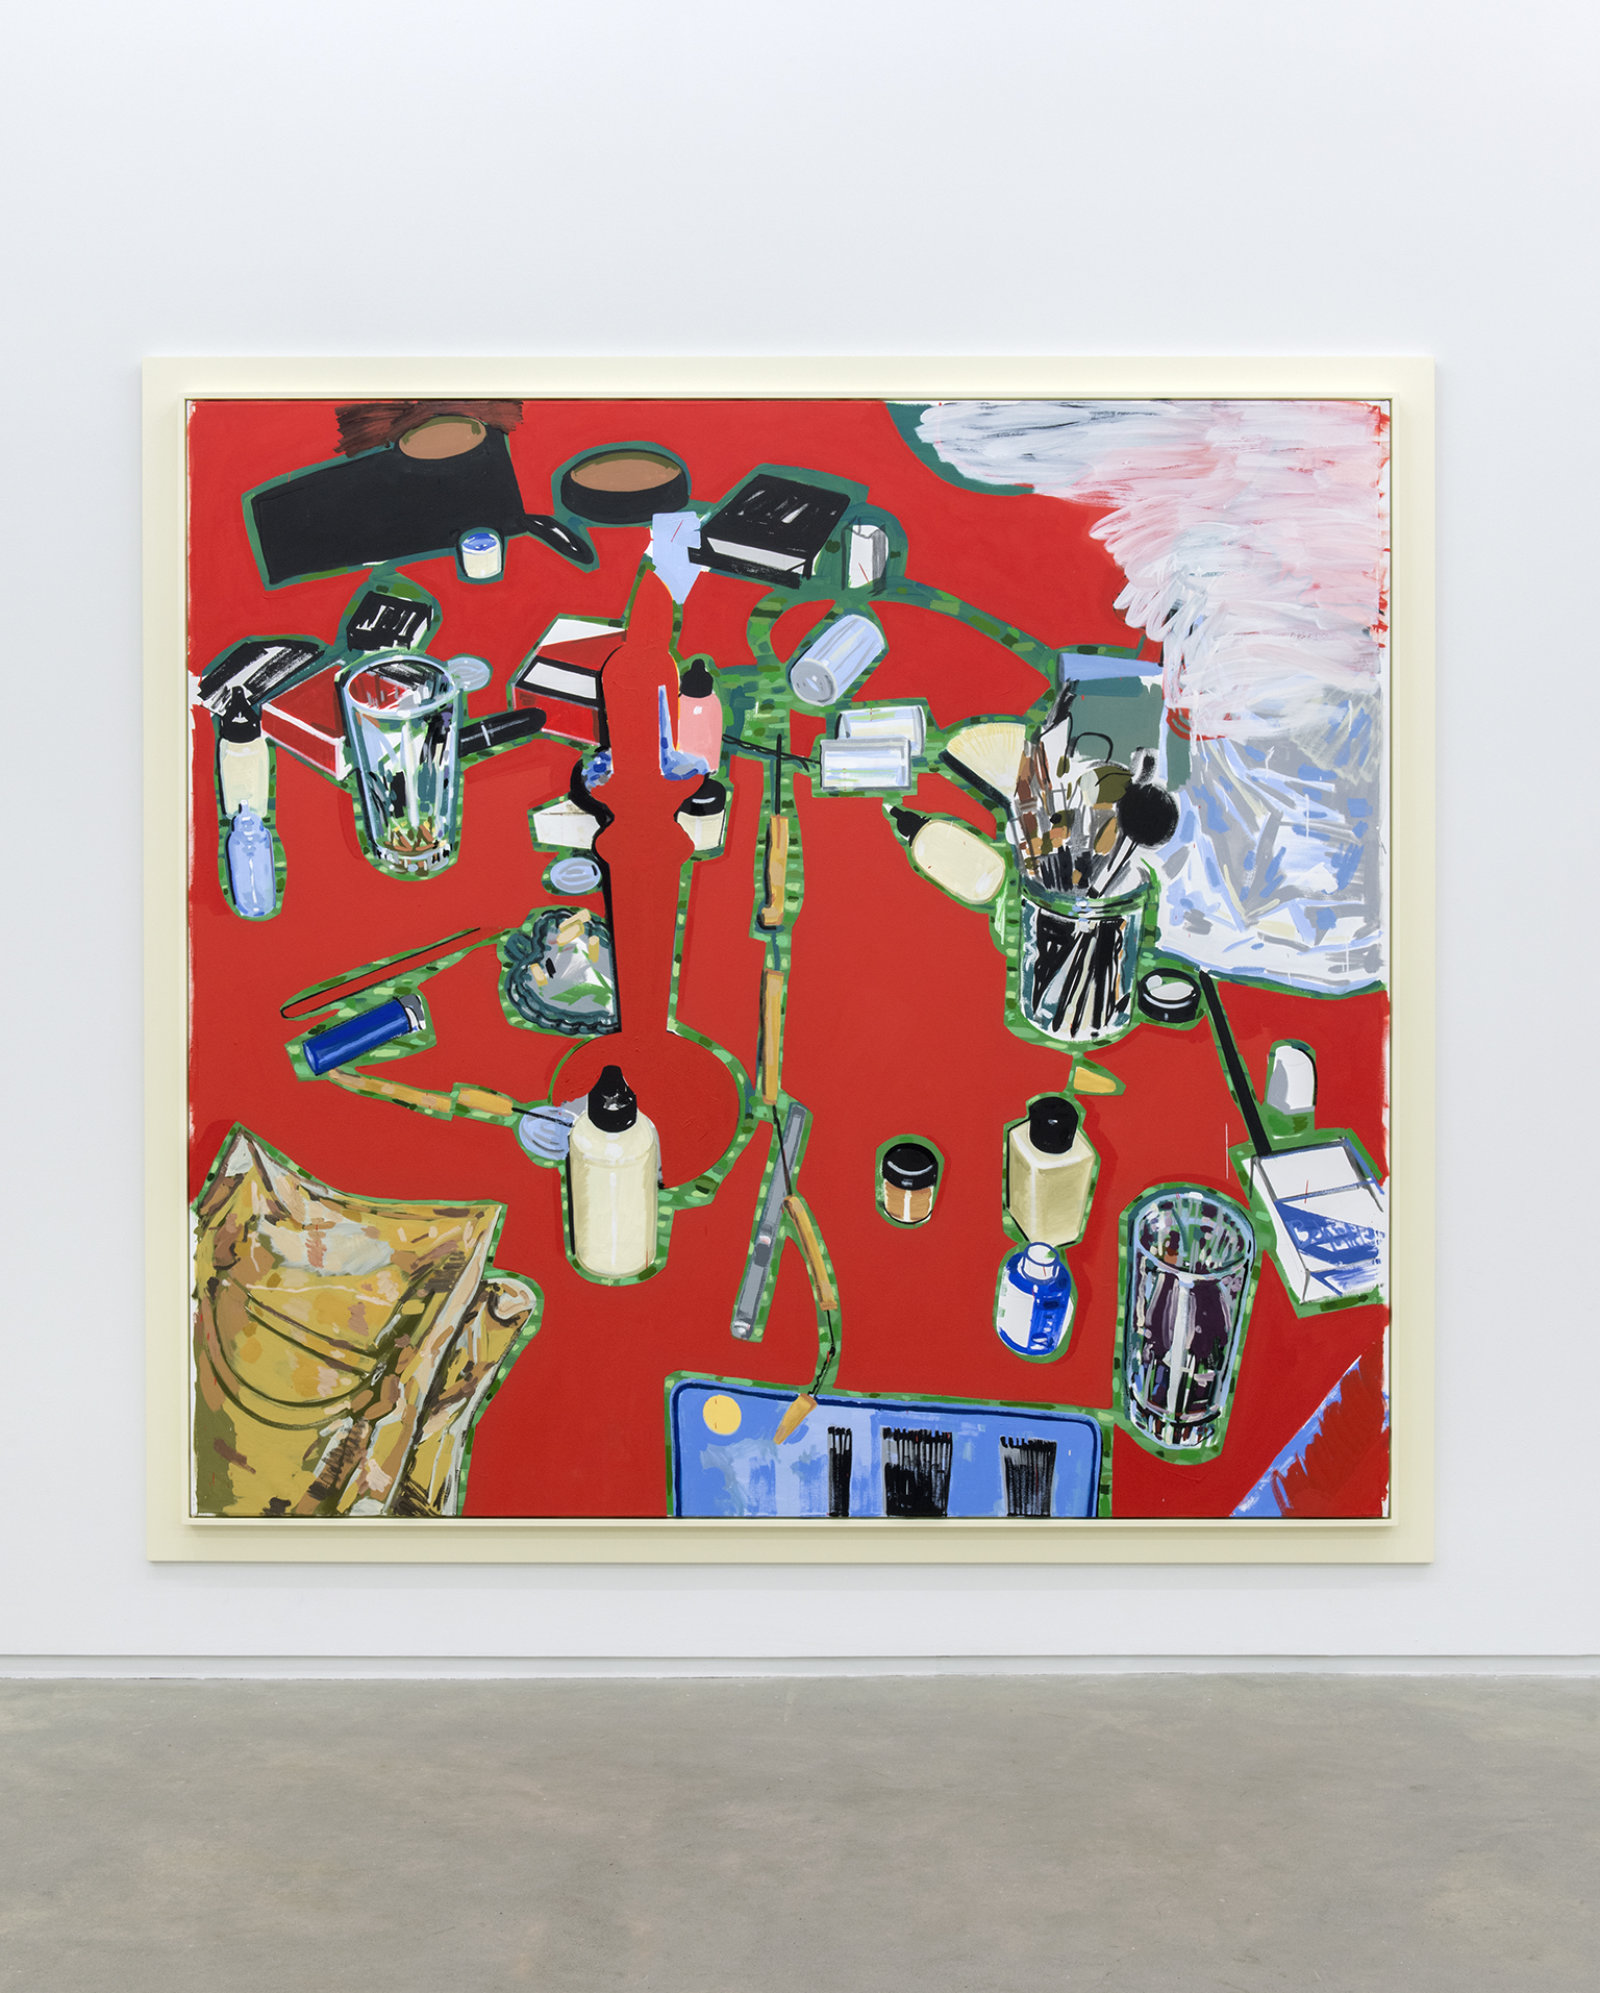 Damian Moppett, Red Table, 2012–2013, oil on canvas, 90 x 96 in. (227 x 243 cm)